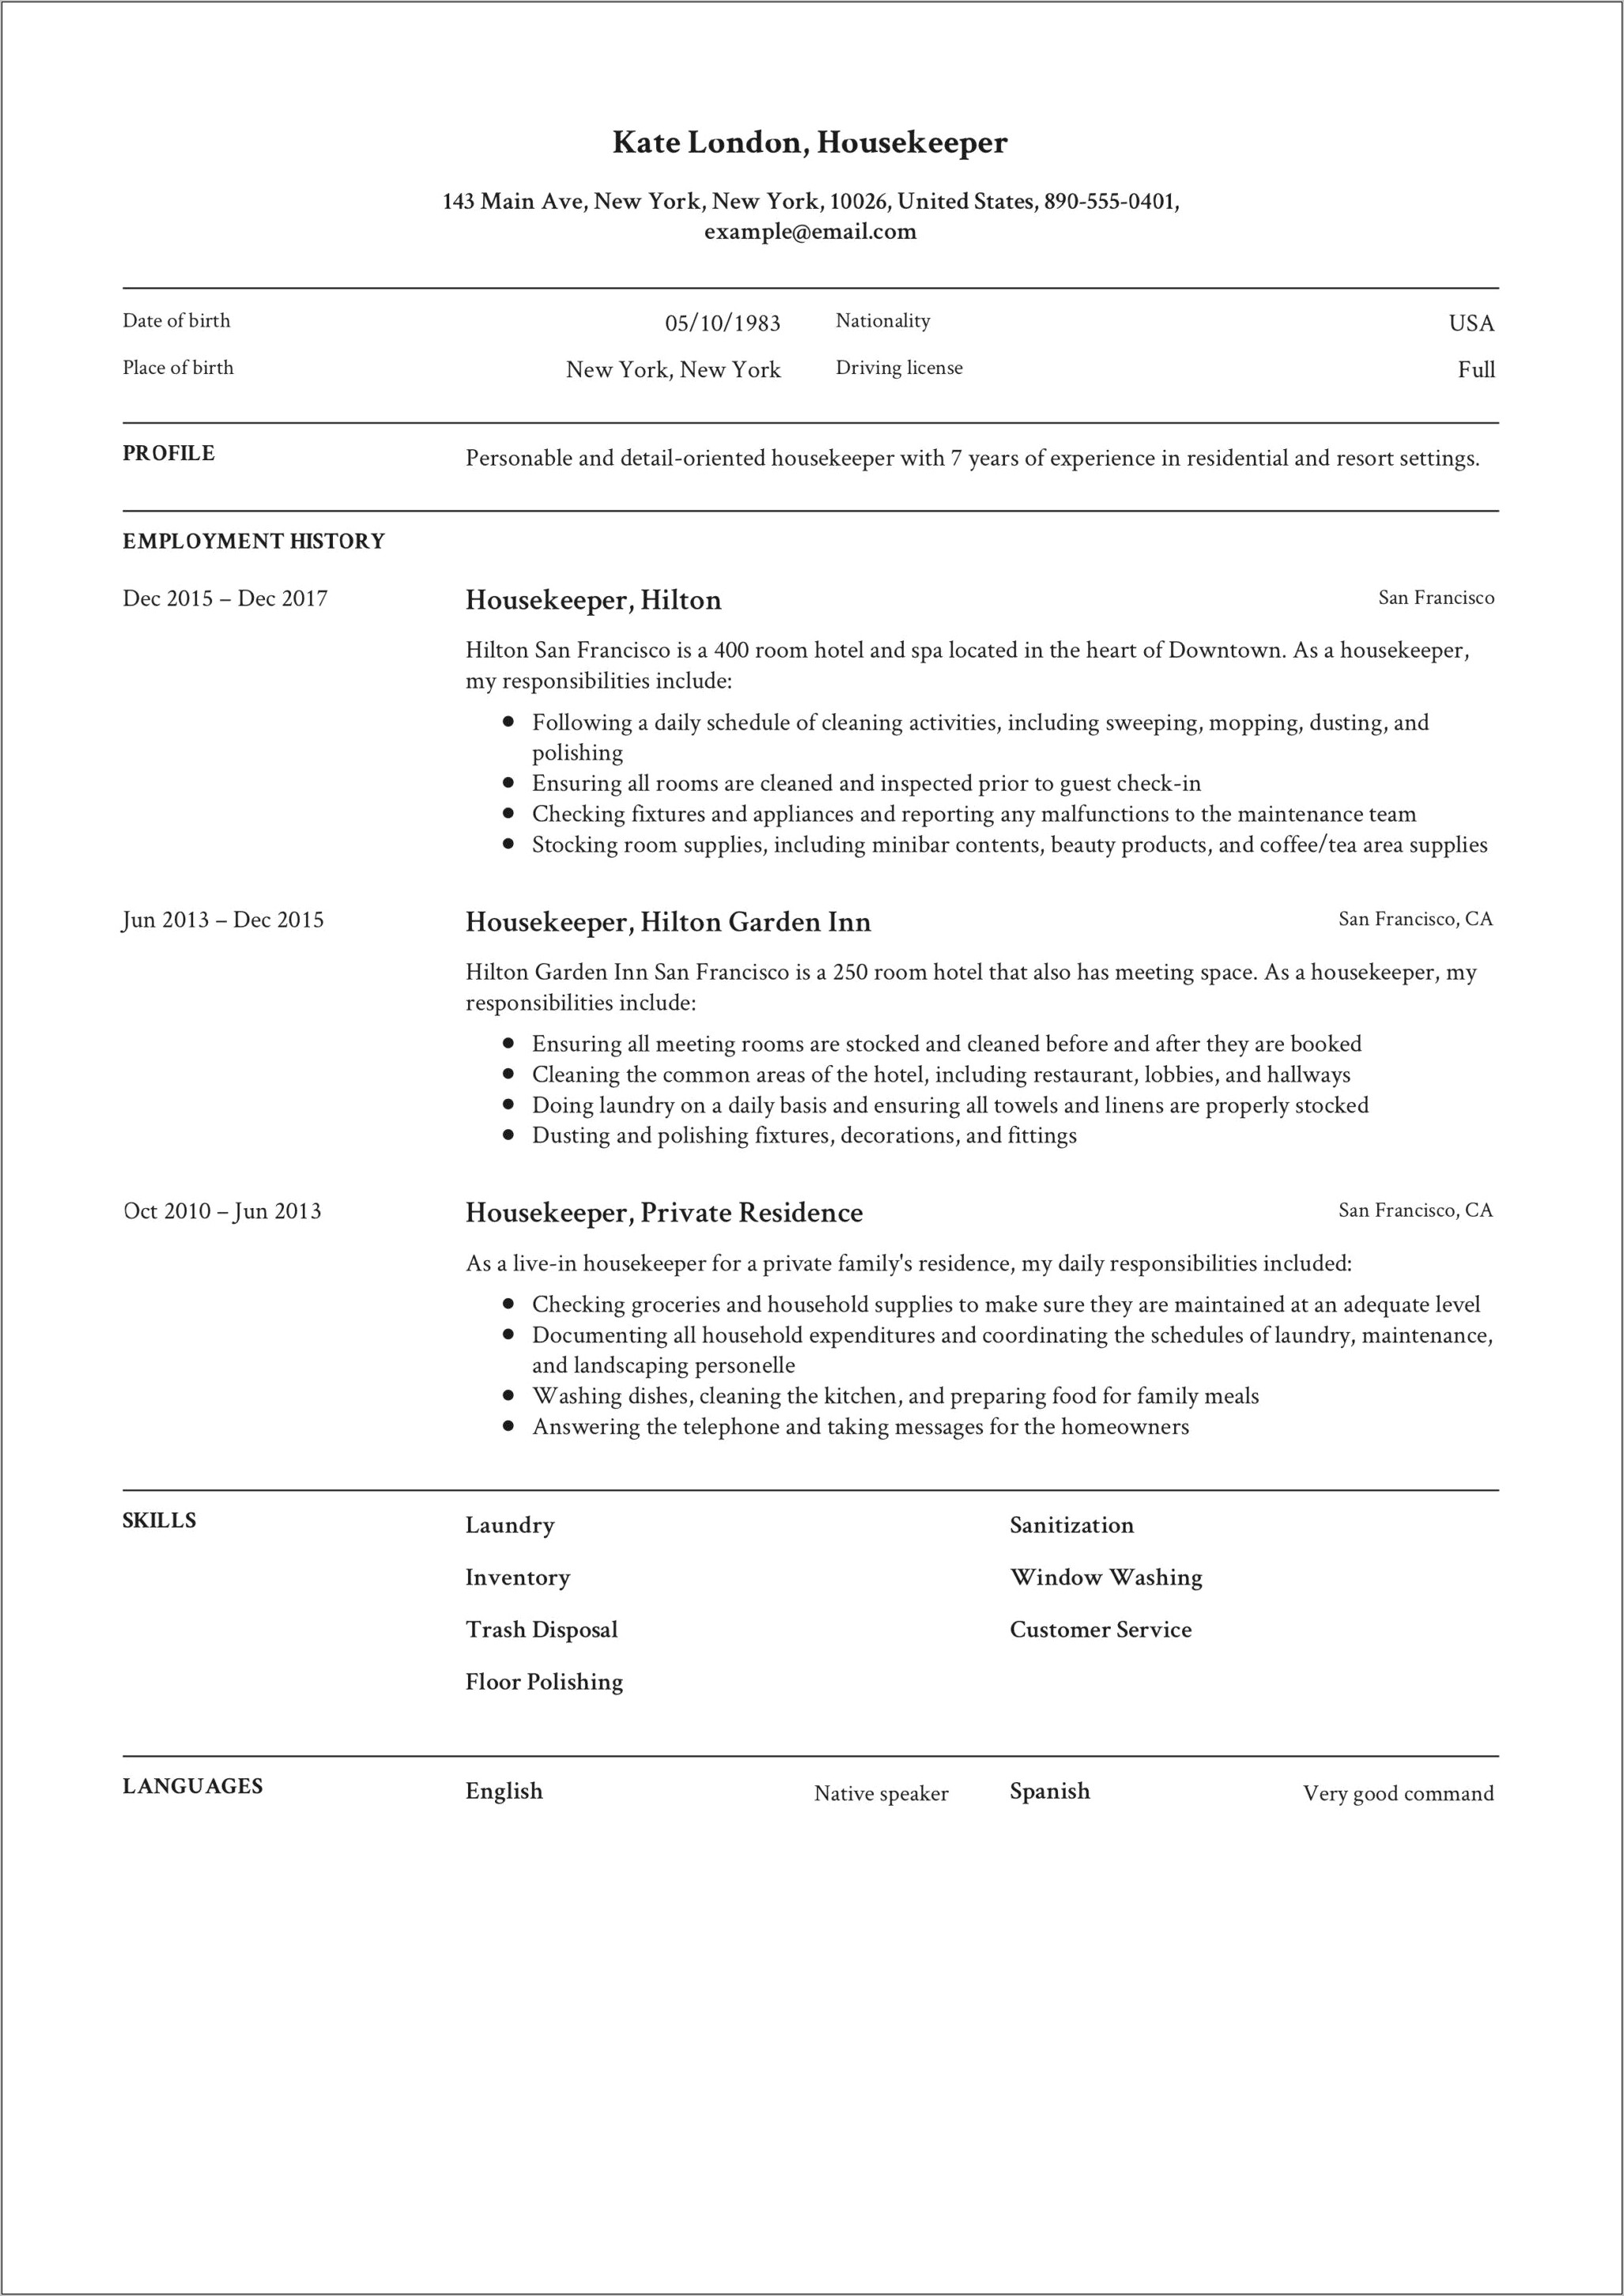 Resume For Applying For A Housekeeping Hotel Job